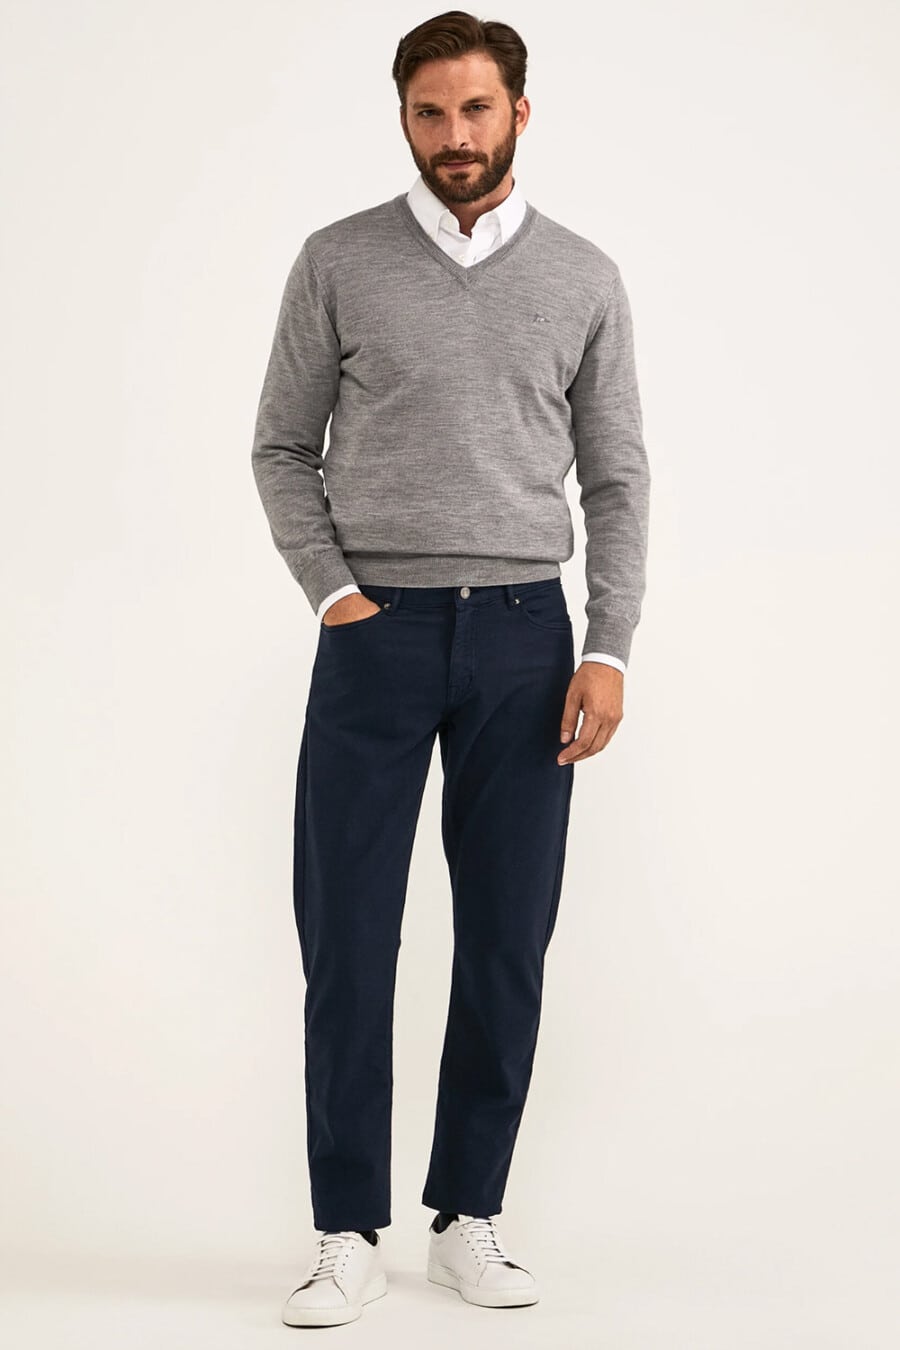 Men's navy chinos, white shirt, grey V-neck merino sweater and white sneakers outfit